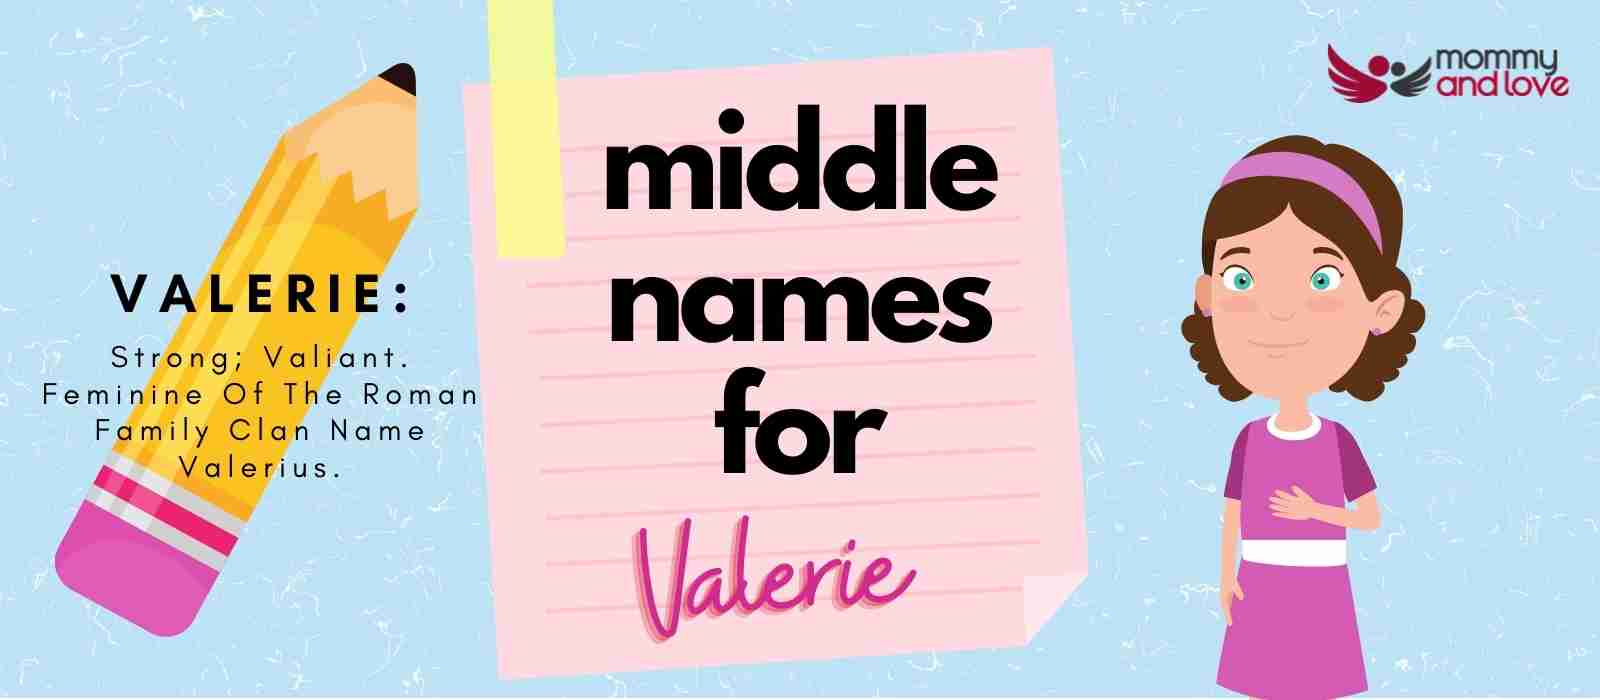 Middle Names for Valerie